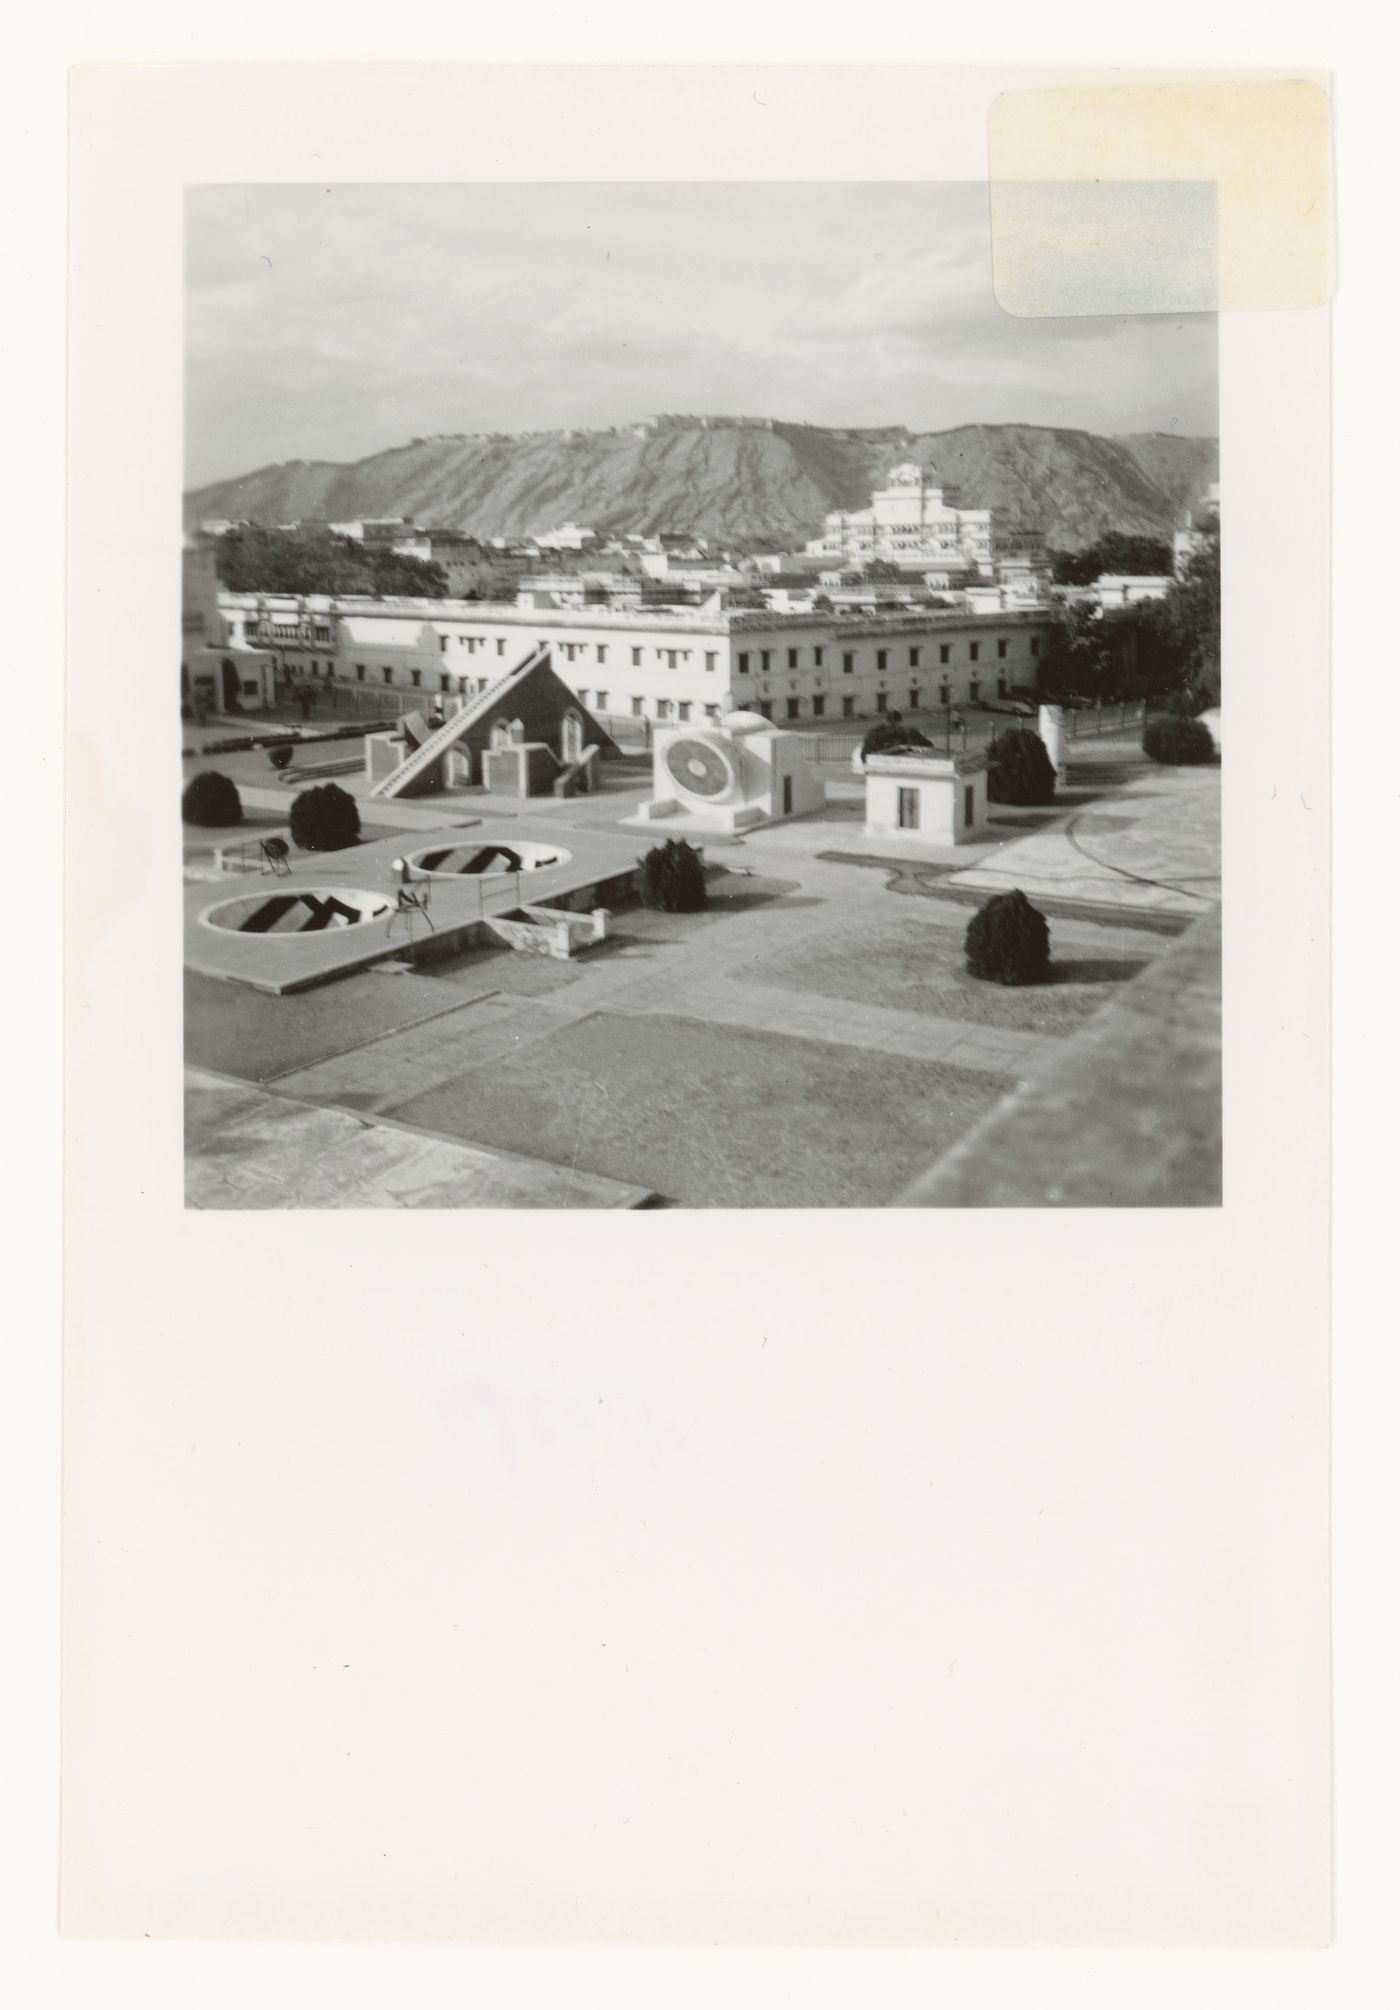 Unidentified view of possibly Chandigarh, India